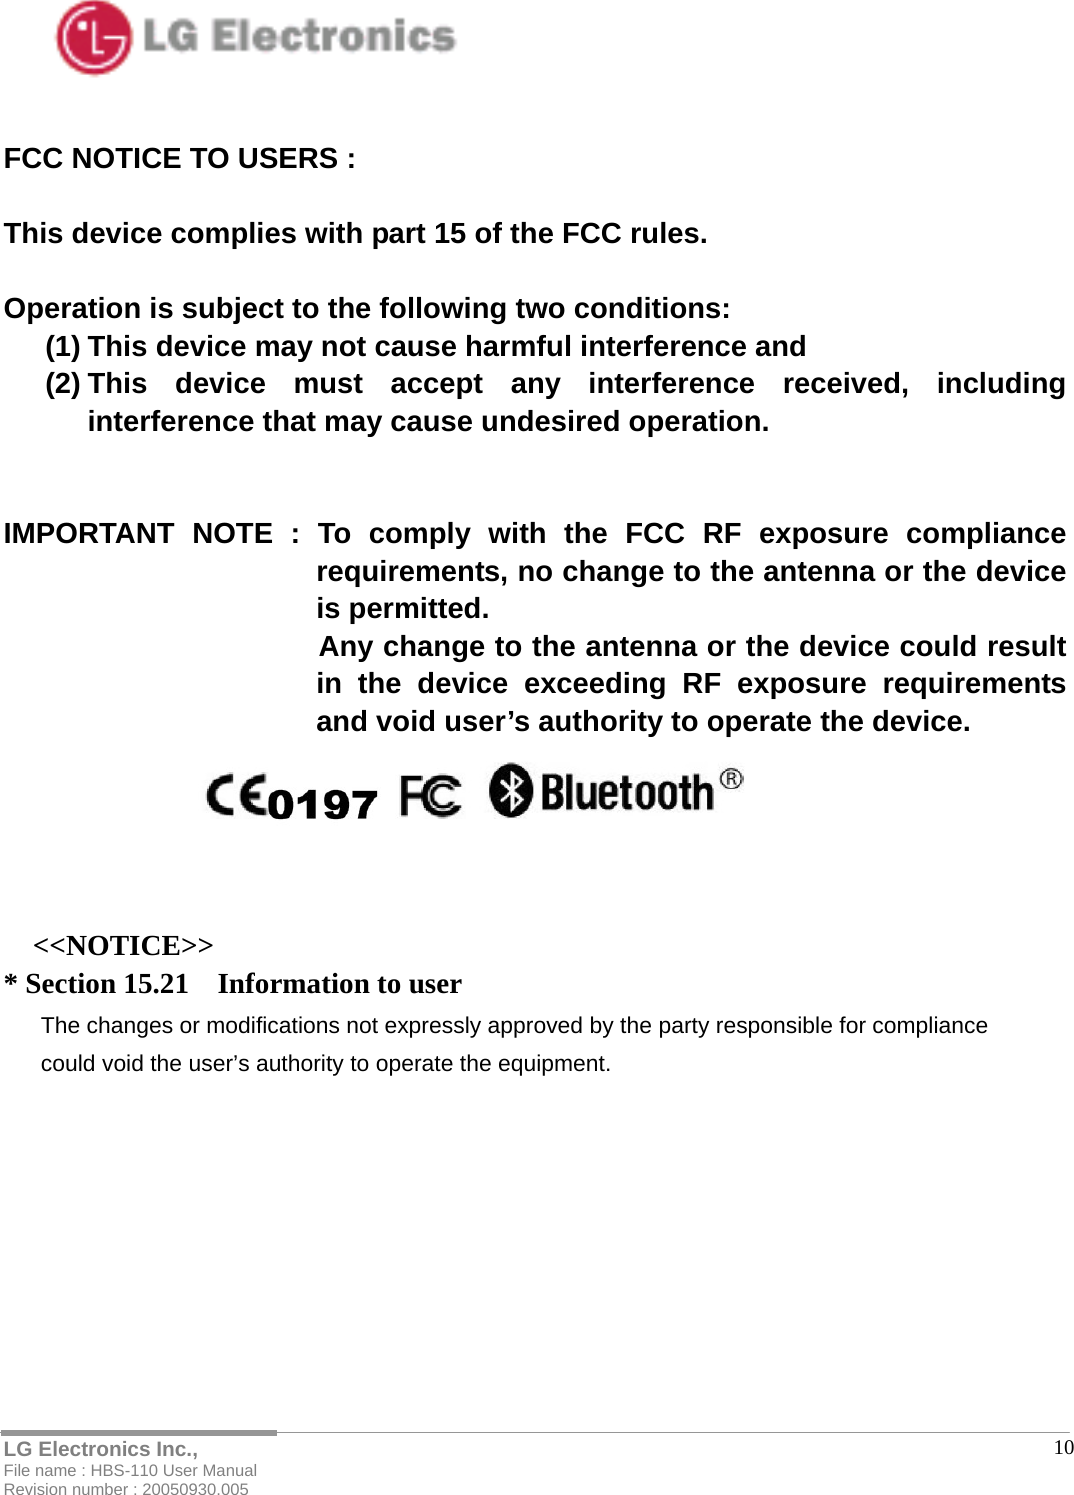   LG Electronics Inc., File name : HBS-110 User Manual Revision number : 20050930.005  10FCC NOTICE TO USERS :  This device complies with part 15 of the FCC rules.  Operation is subject to the following two conditions: (1) This device may not cause harmful interference and (2) This device must accept any interference received, including interference that may cause undesired operation.   IMPORTANT NOTE : To comply with the FCC RF exposure compliance requirements, no change to the antenna or the device is permitted.                       Any change to the antenna or the device could result in the device exceeding RF exposure requirements and void user’s authority to operate the device.    &lt;&lt;NOTICE&gt;&gt; * Section 15.21    Information to user The changes or modifications not expressly approved by the party responsible for compliance   could void the user’s authority to operate the equipment.     